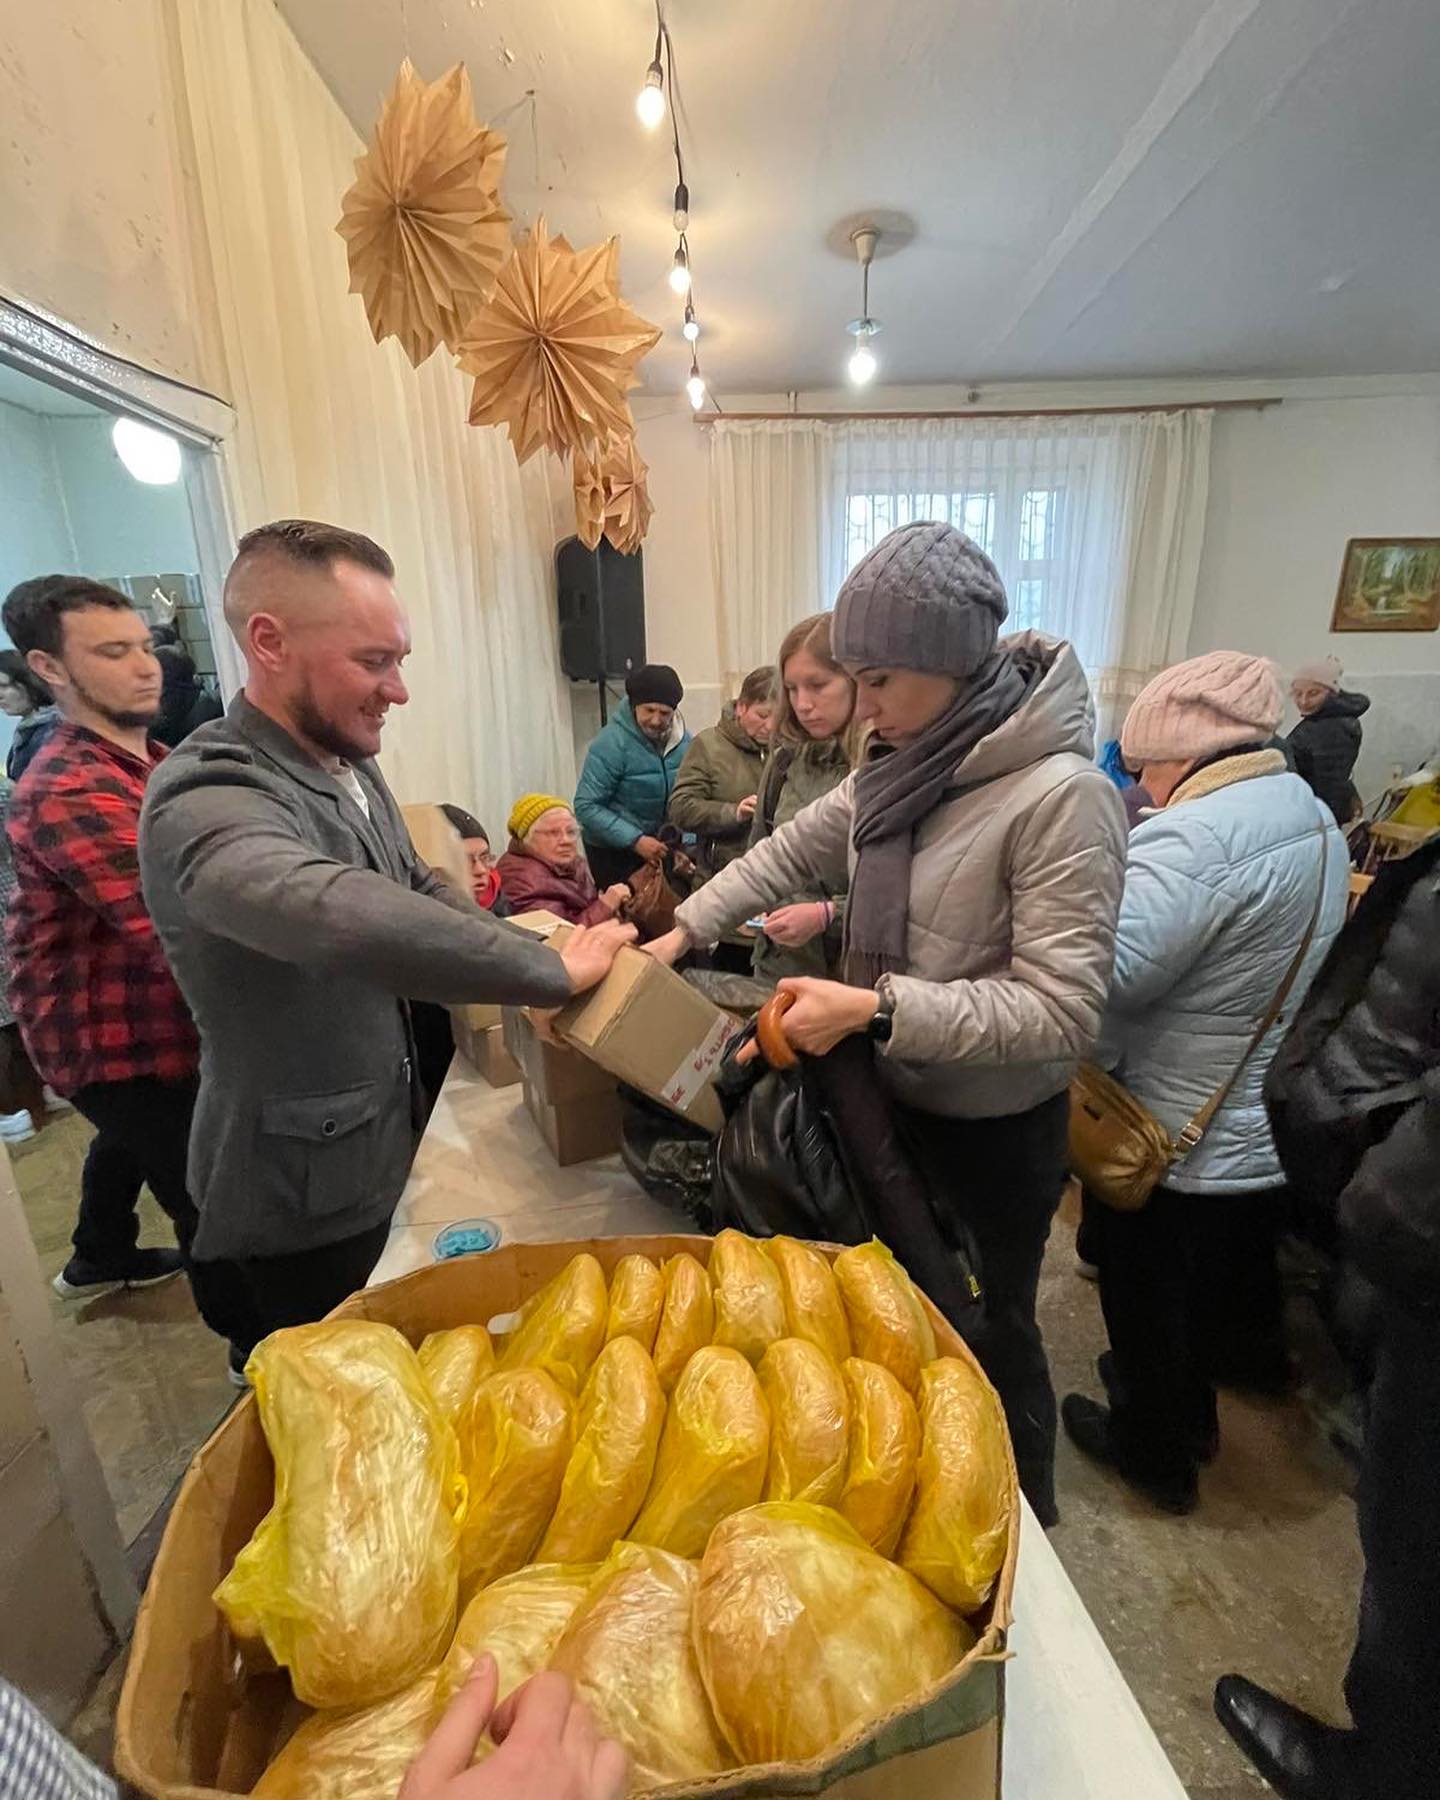 A man hands out bread to a woman in a crowded indoor setting with people waiting in line for humanitarian aid.